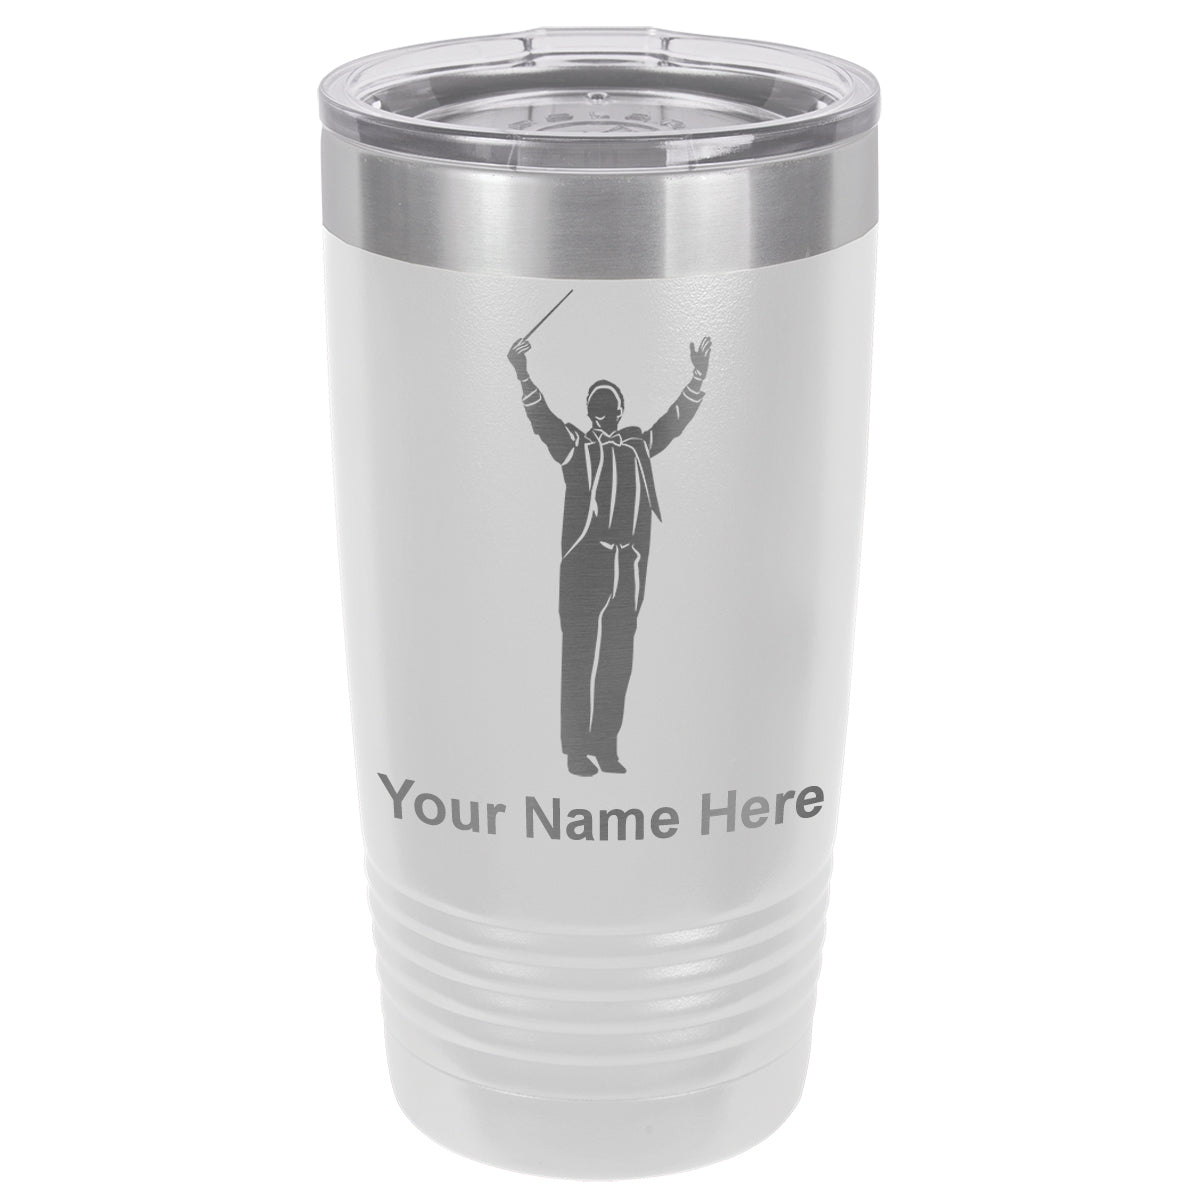 20oz Vacuum Insulated Tumbler Mug, Band Director, Personalized Engraving Included